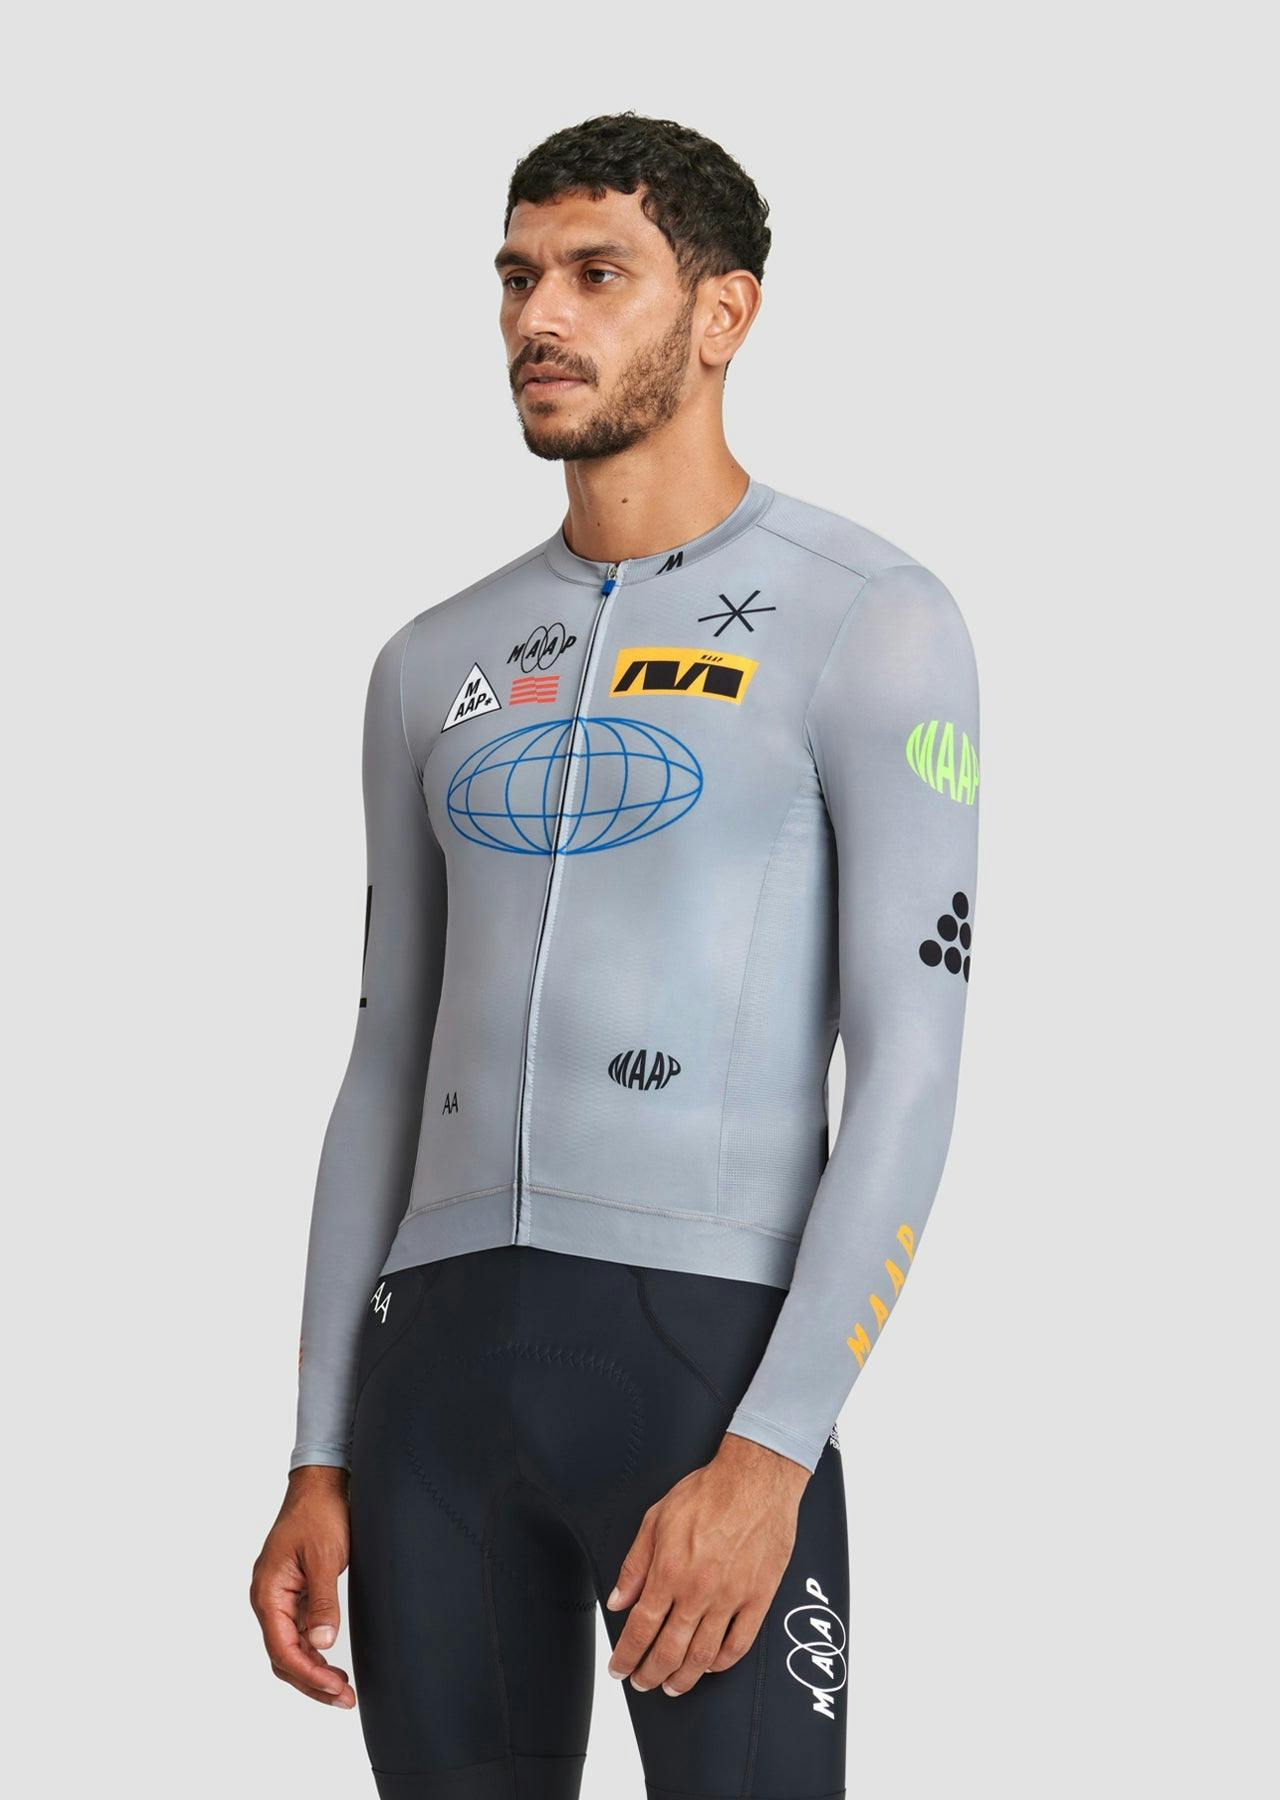 Axis Pro LS Jersey